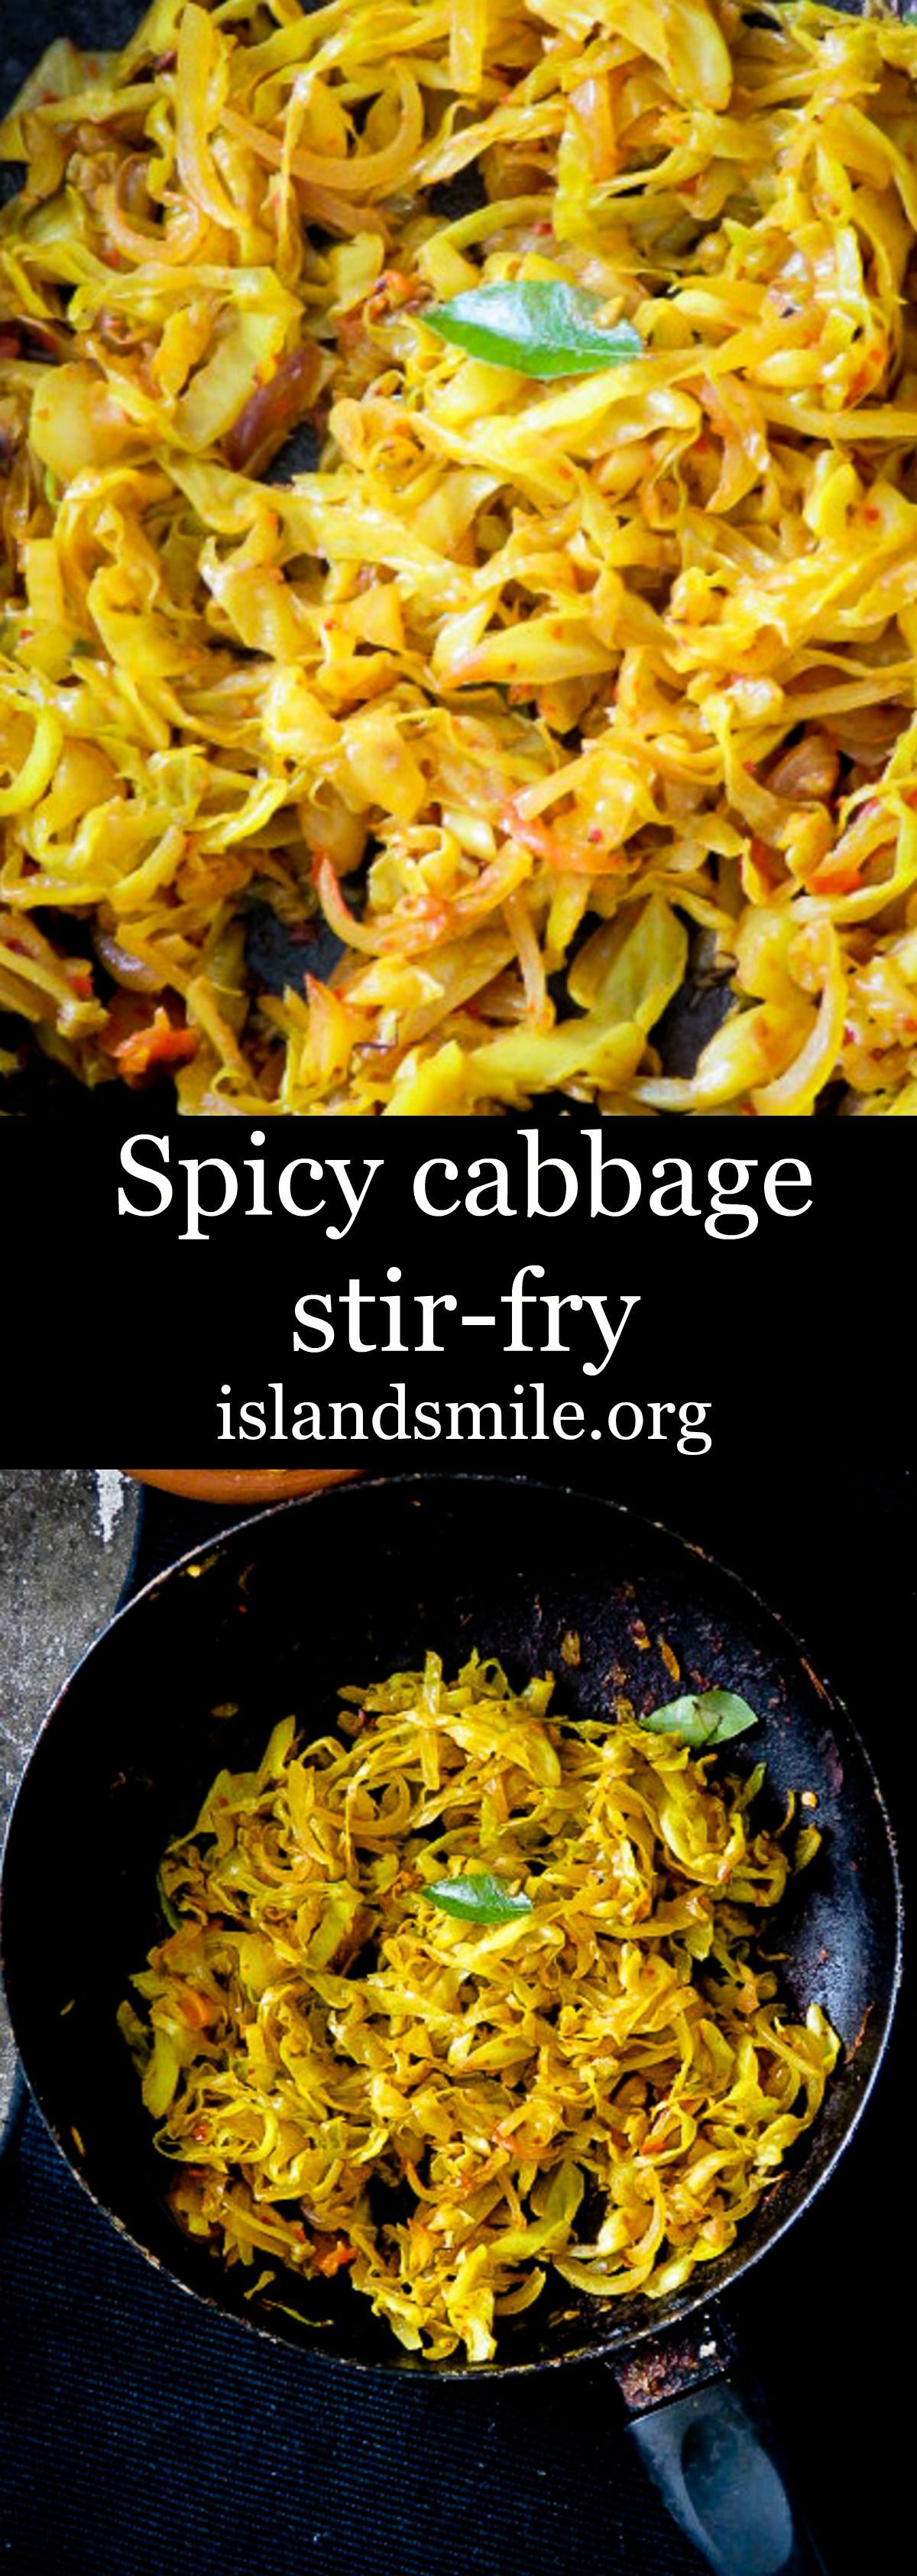 Gluten-free, vegetarian and a less than 20-minute dish to prepare, you’ll want to try a Spicy chilli Cabbage stir-fry next time